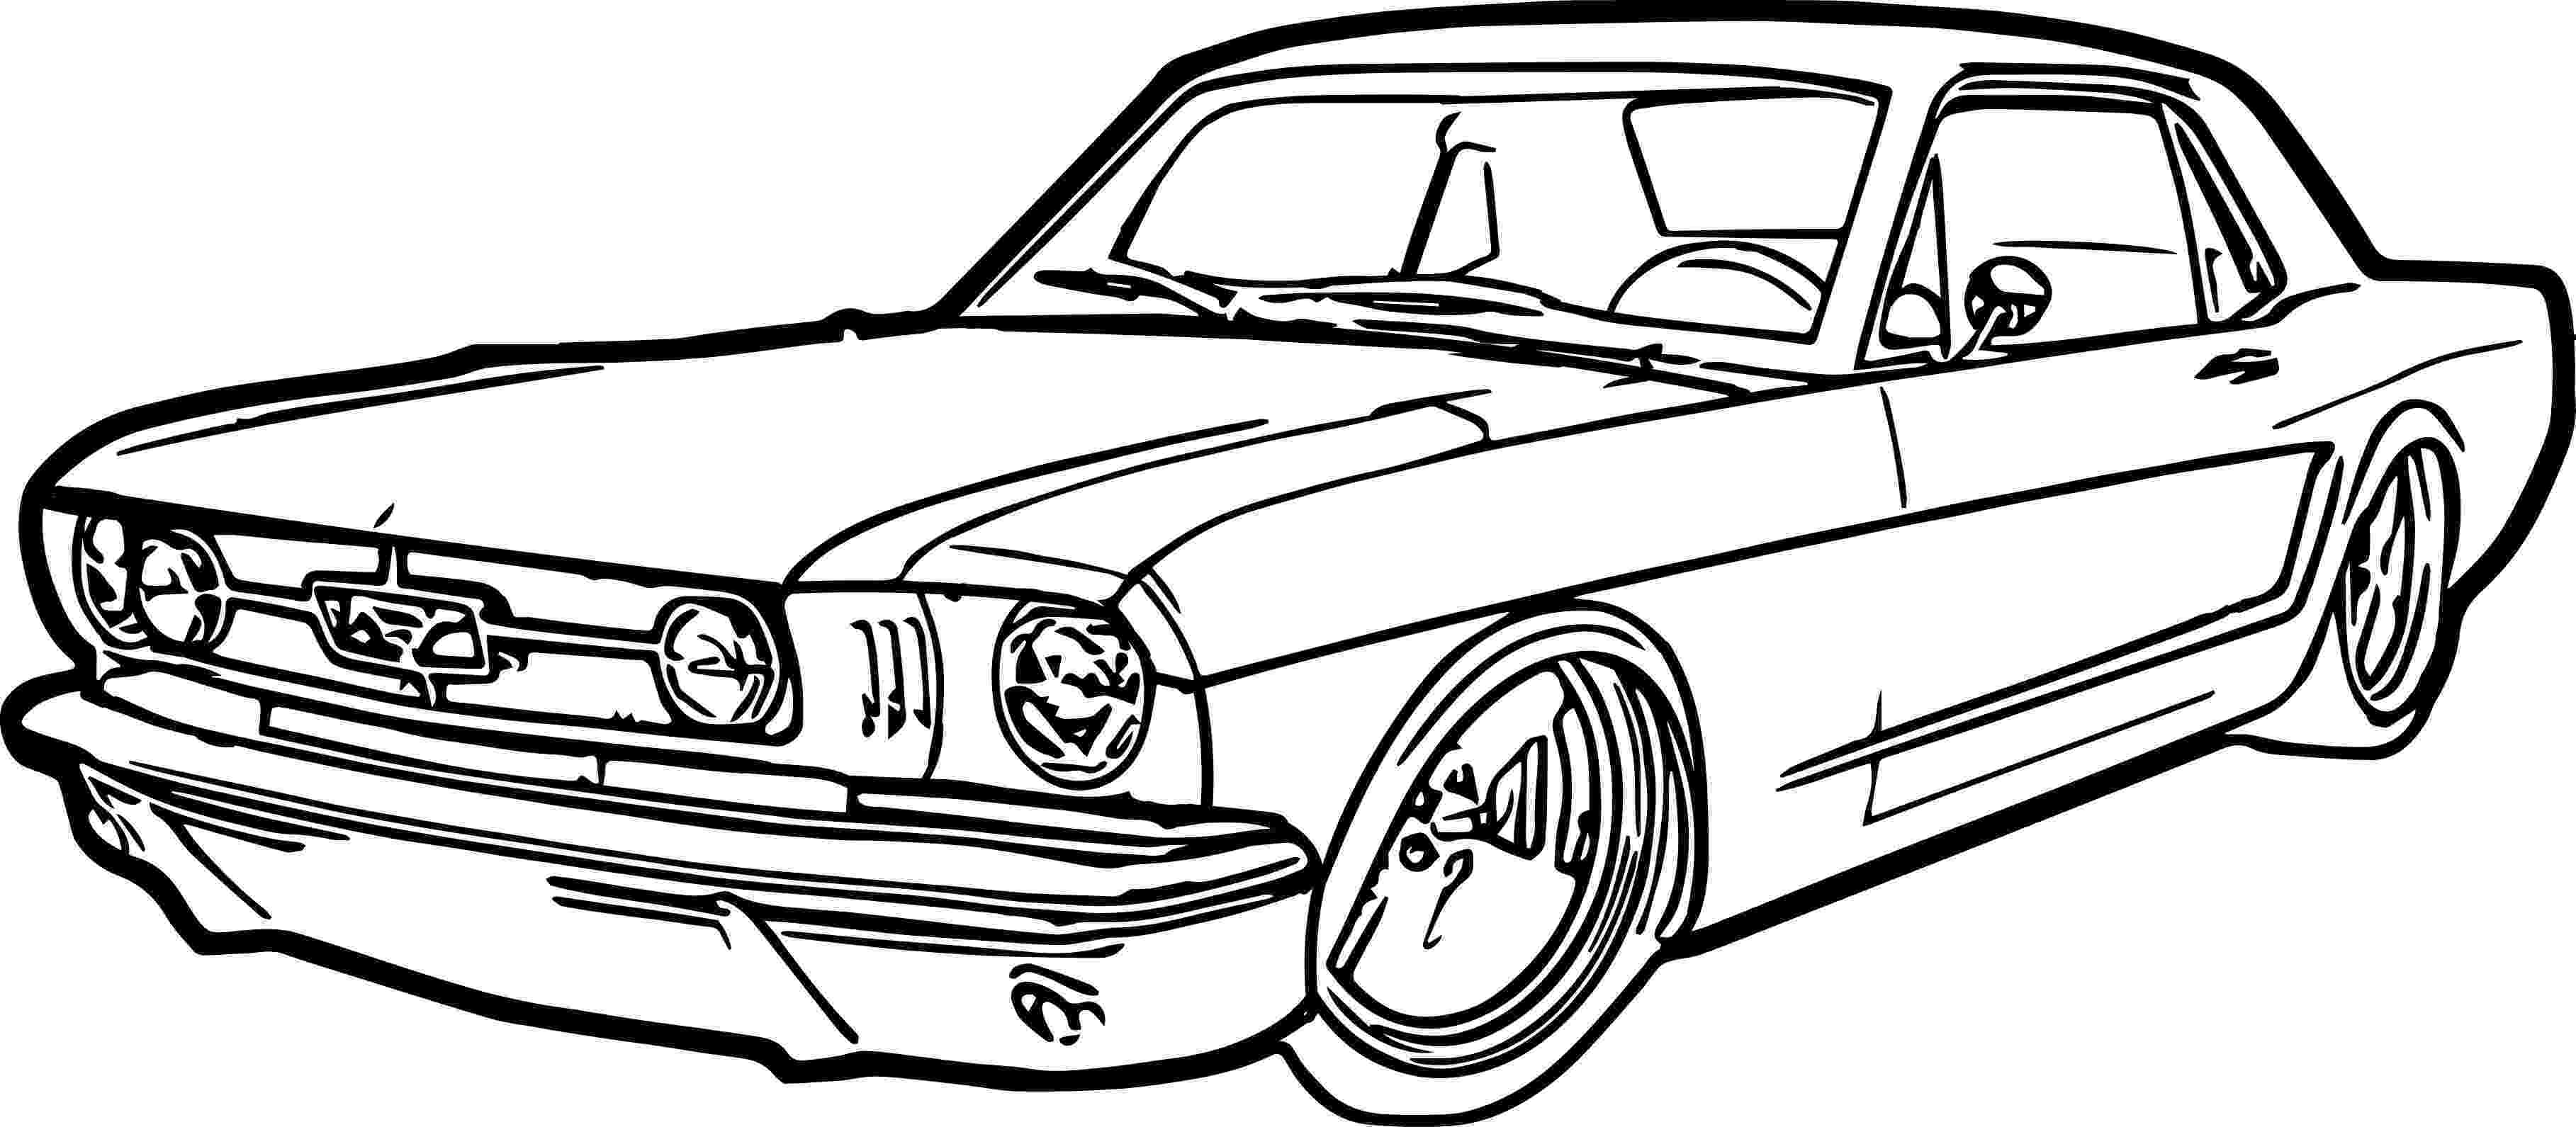 free printable car coloring pages racing cars coloring pages to download and print for free car pages printable free coloring 